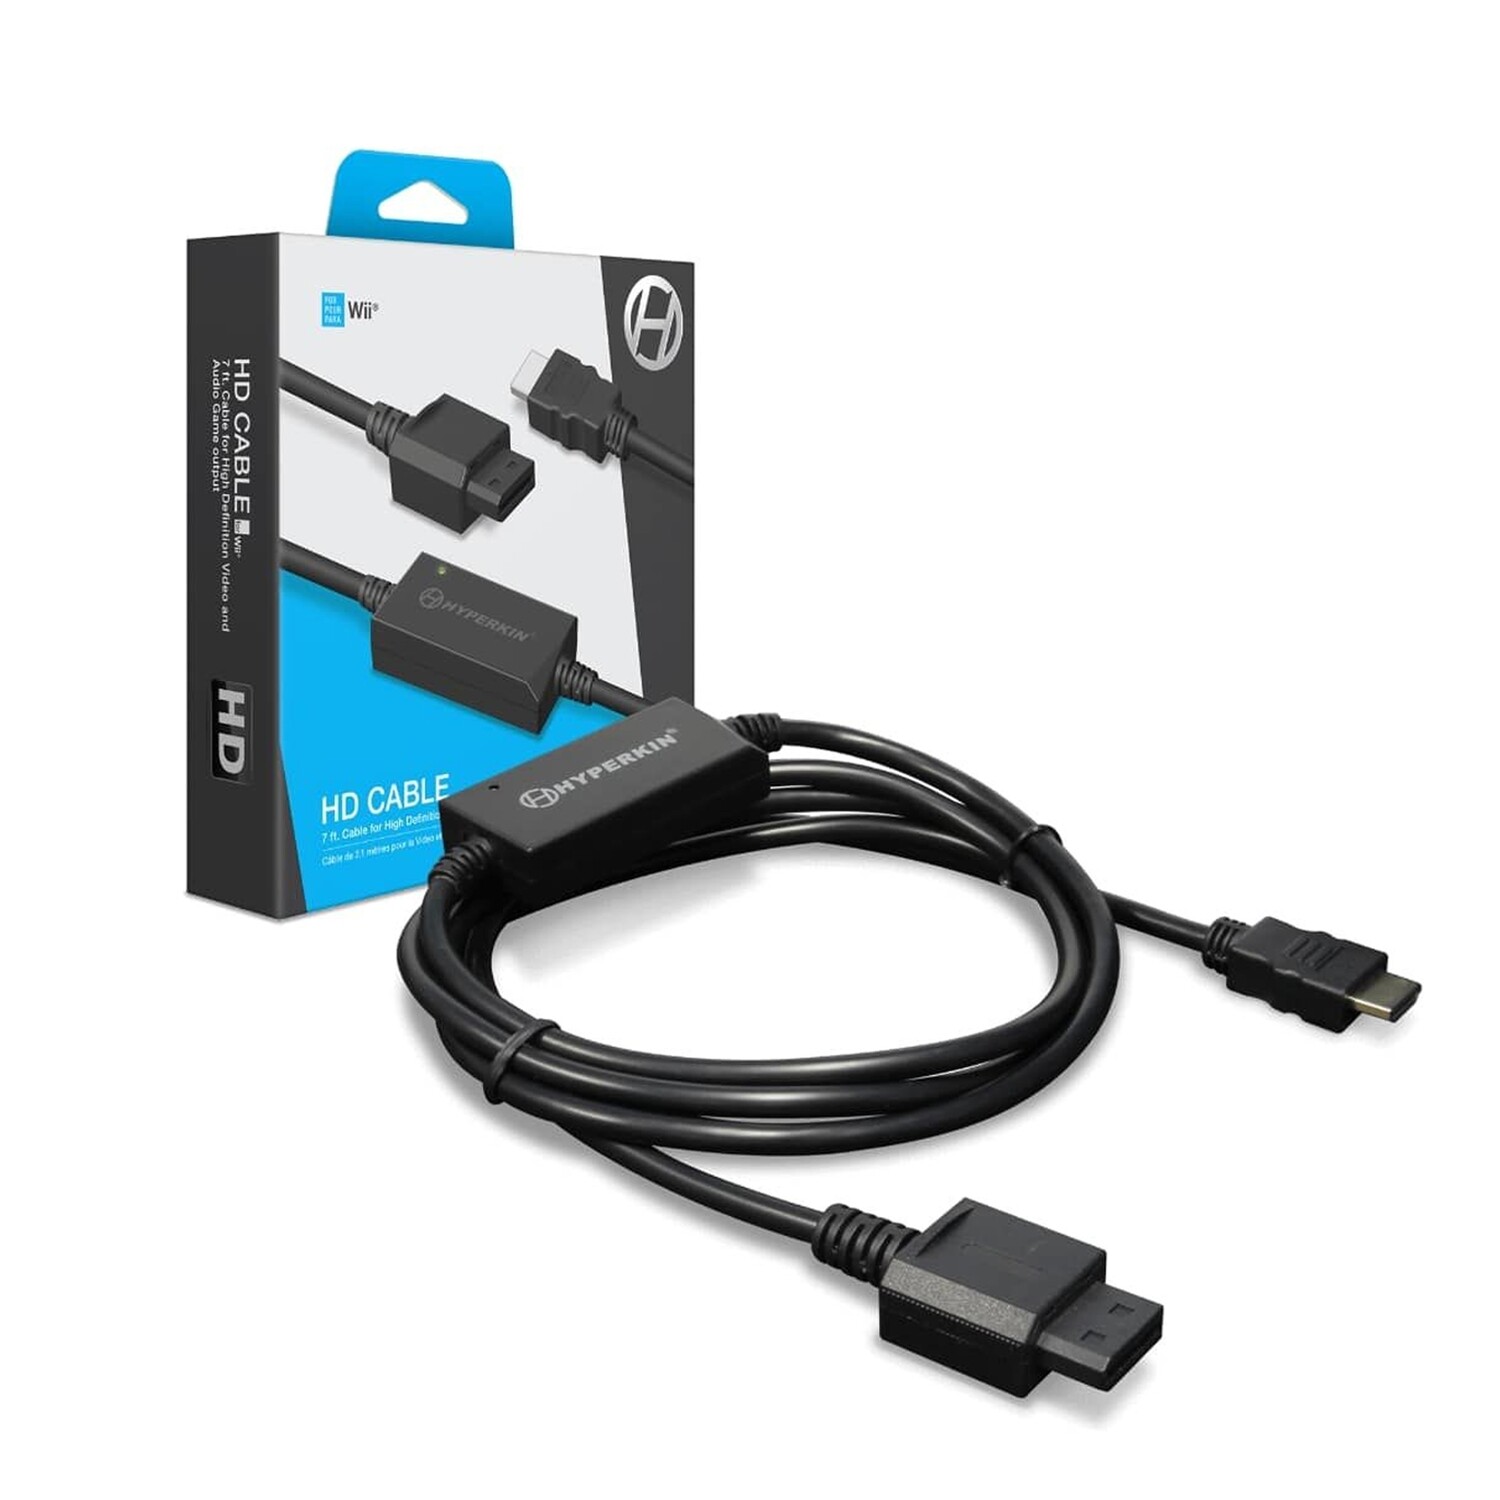 Hyperkin HD Cable For Wii